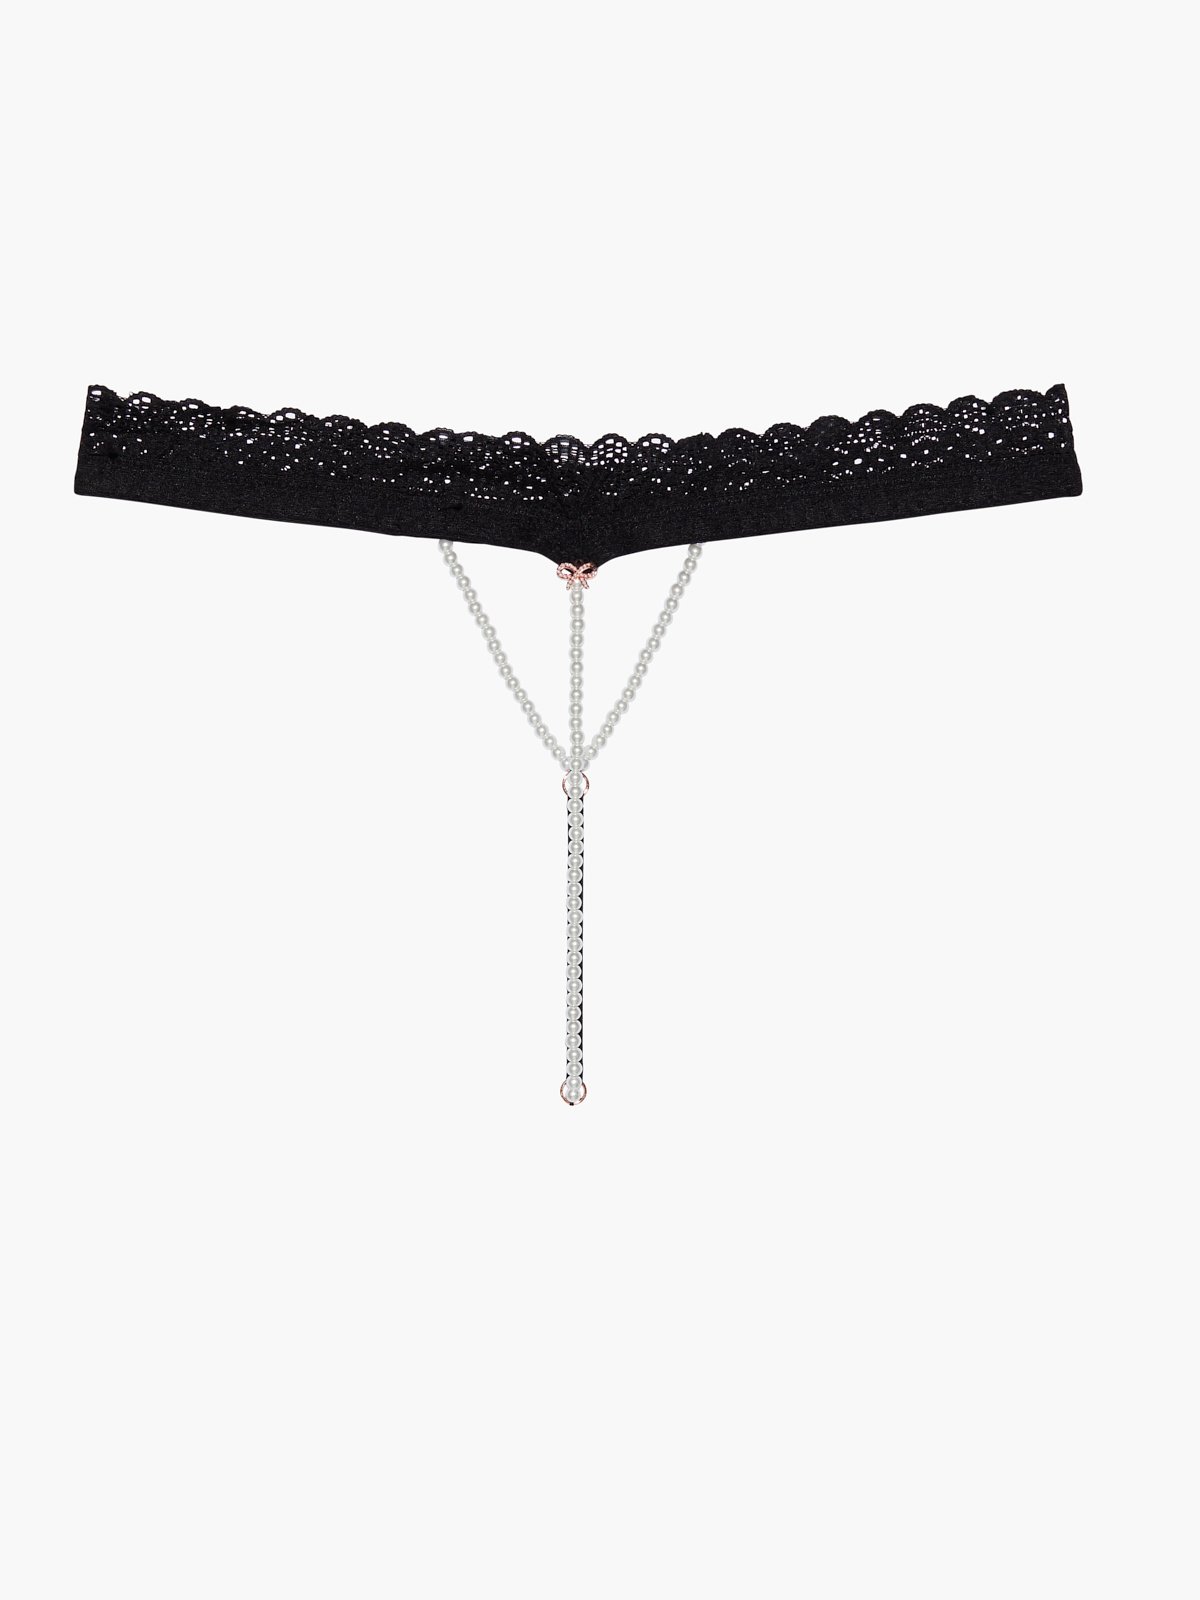 I Wore a Pearl Thong for A Day